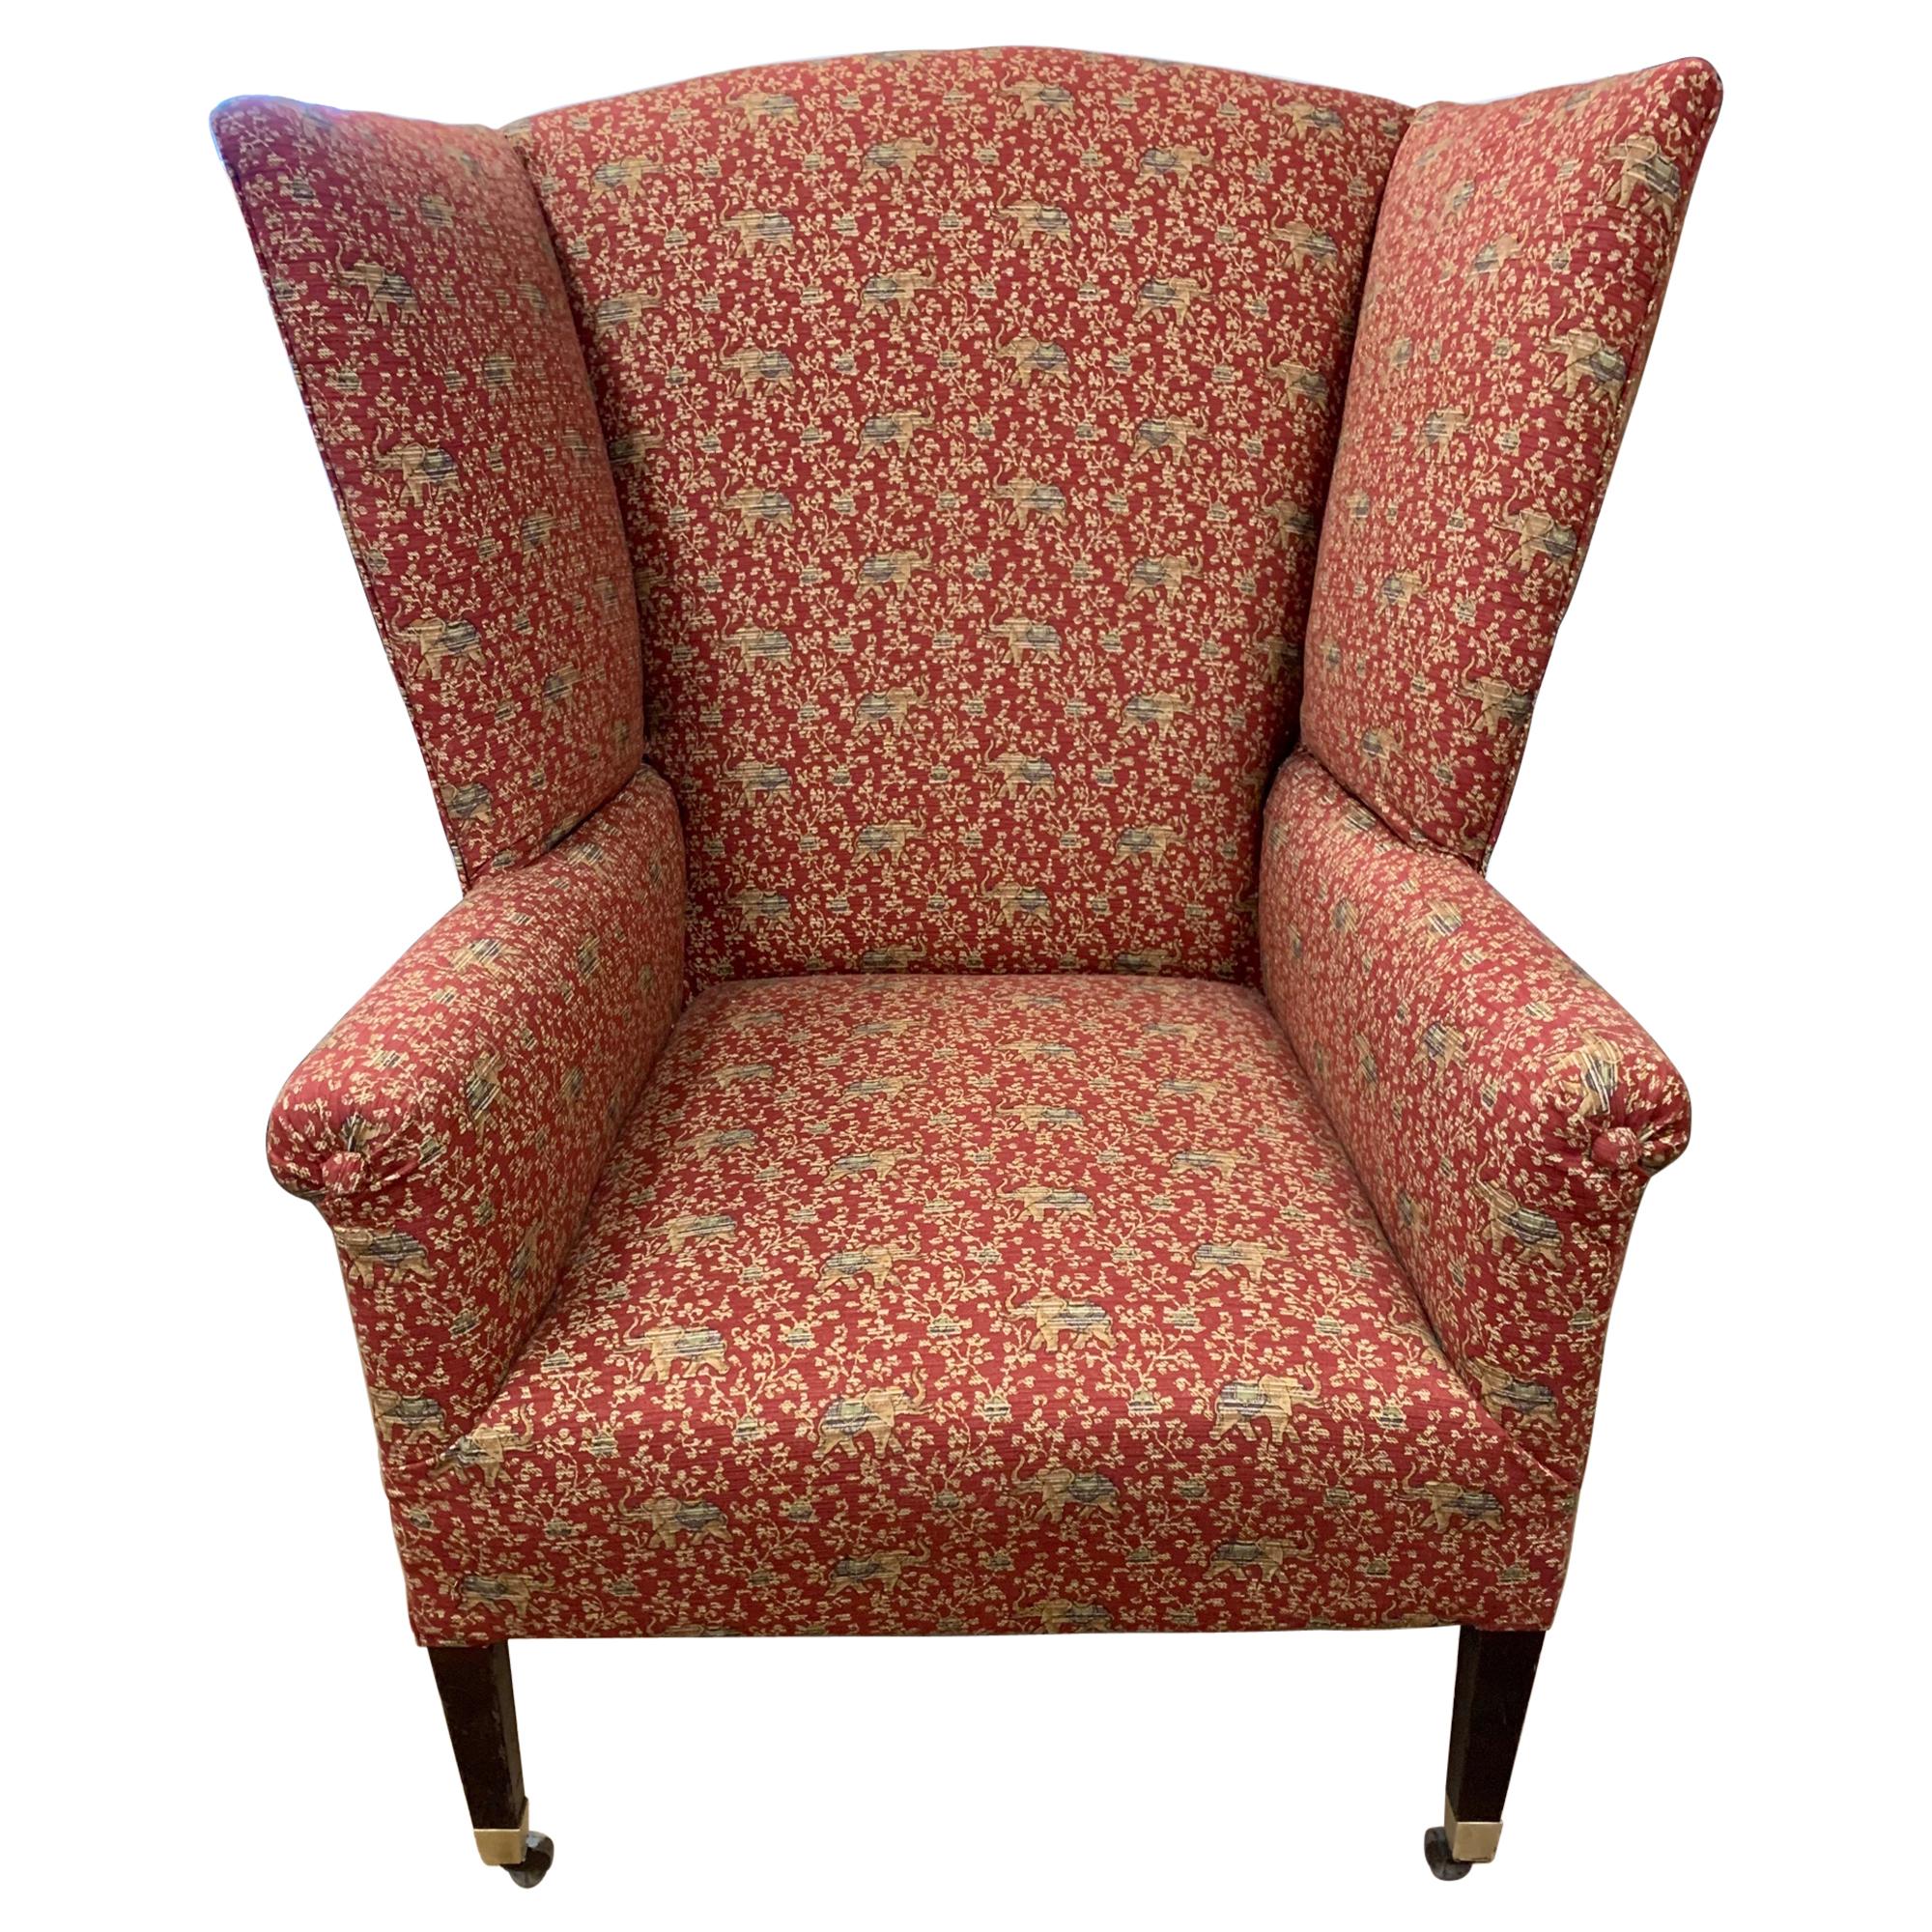 Modern Wingback Chair with Red Chinoiserie Print Upholstery